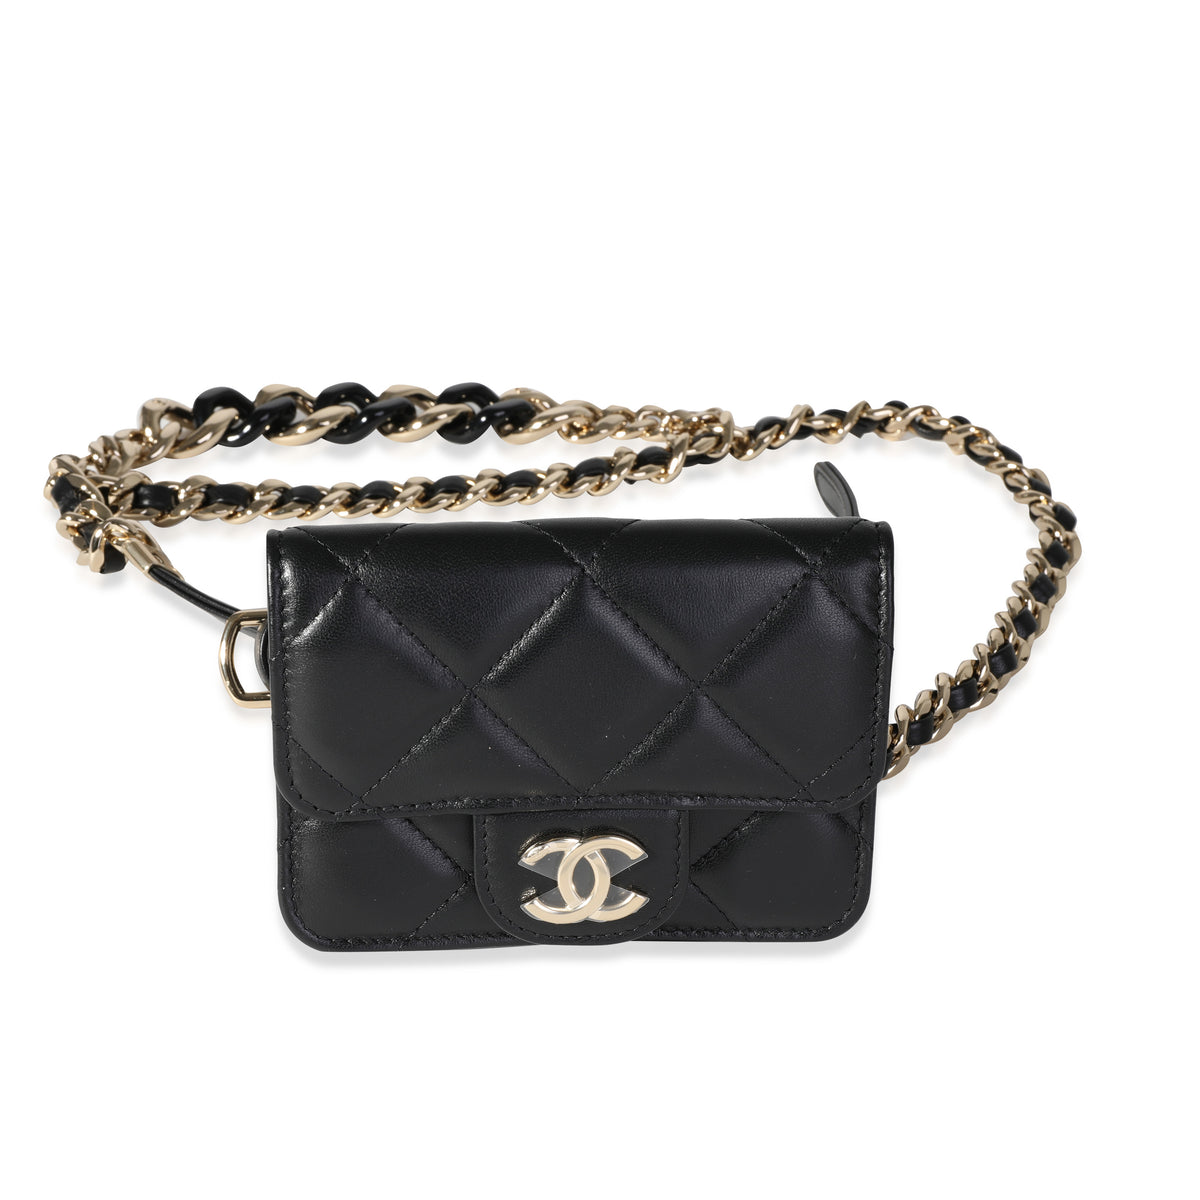 Giuliana Rancic Collection Diamond Quilted Leather Belt Bag